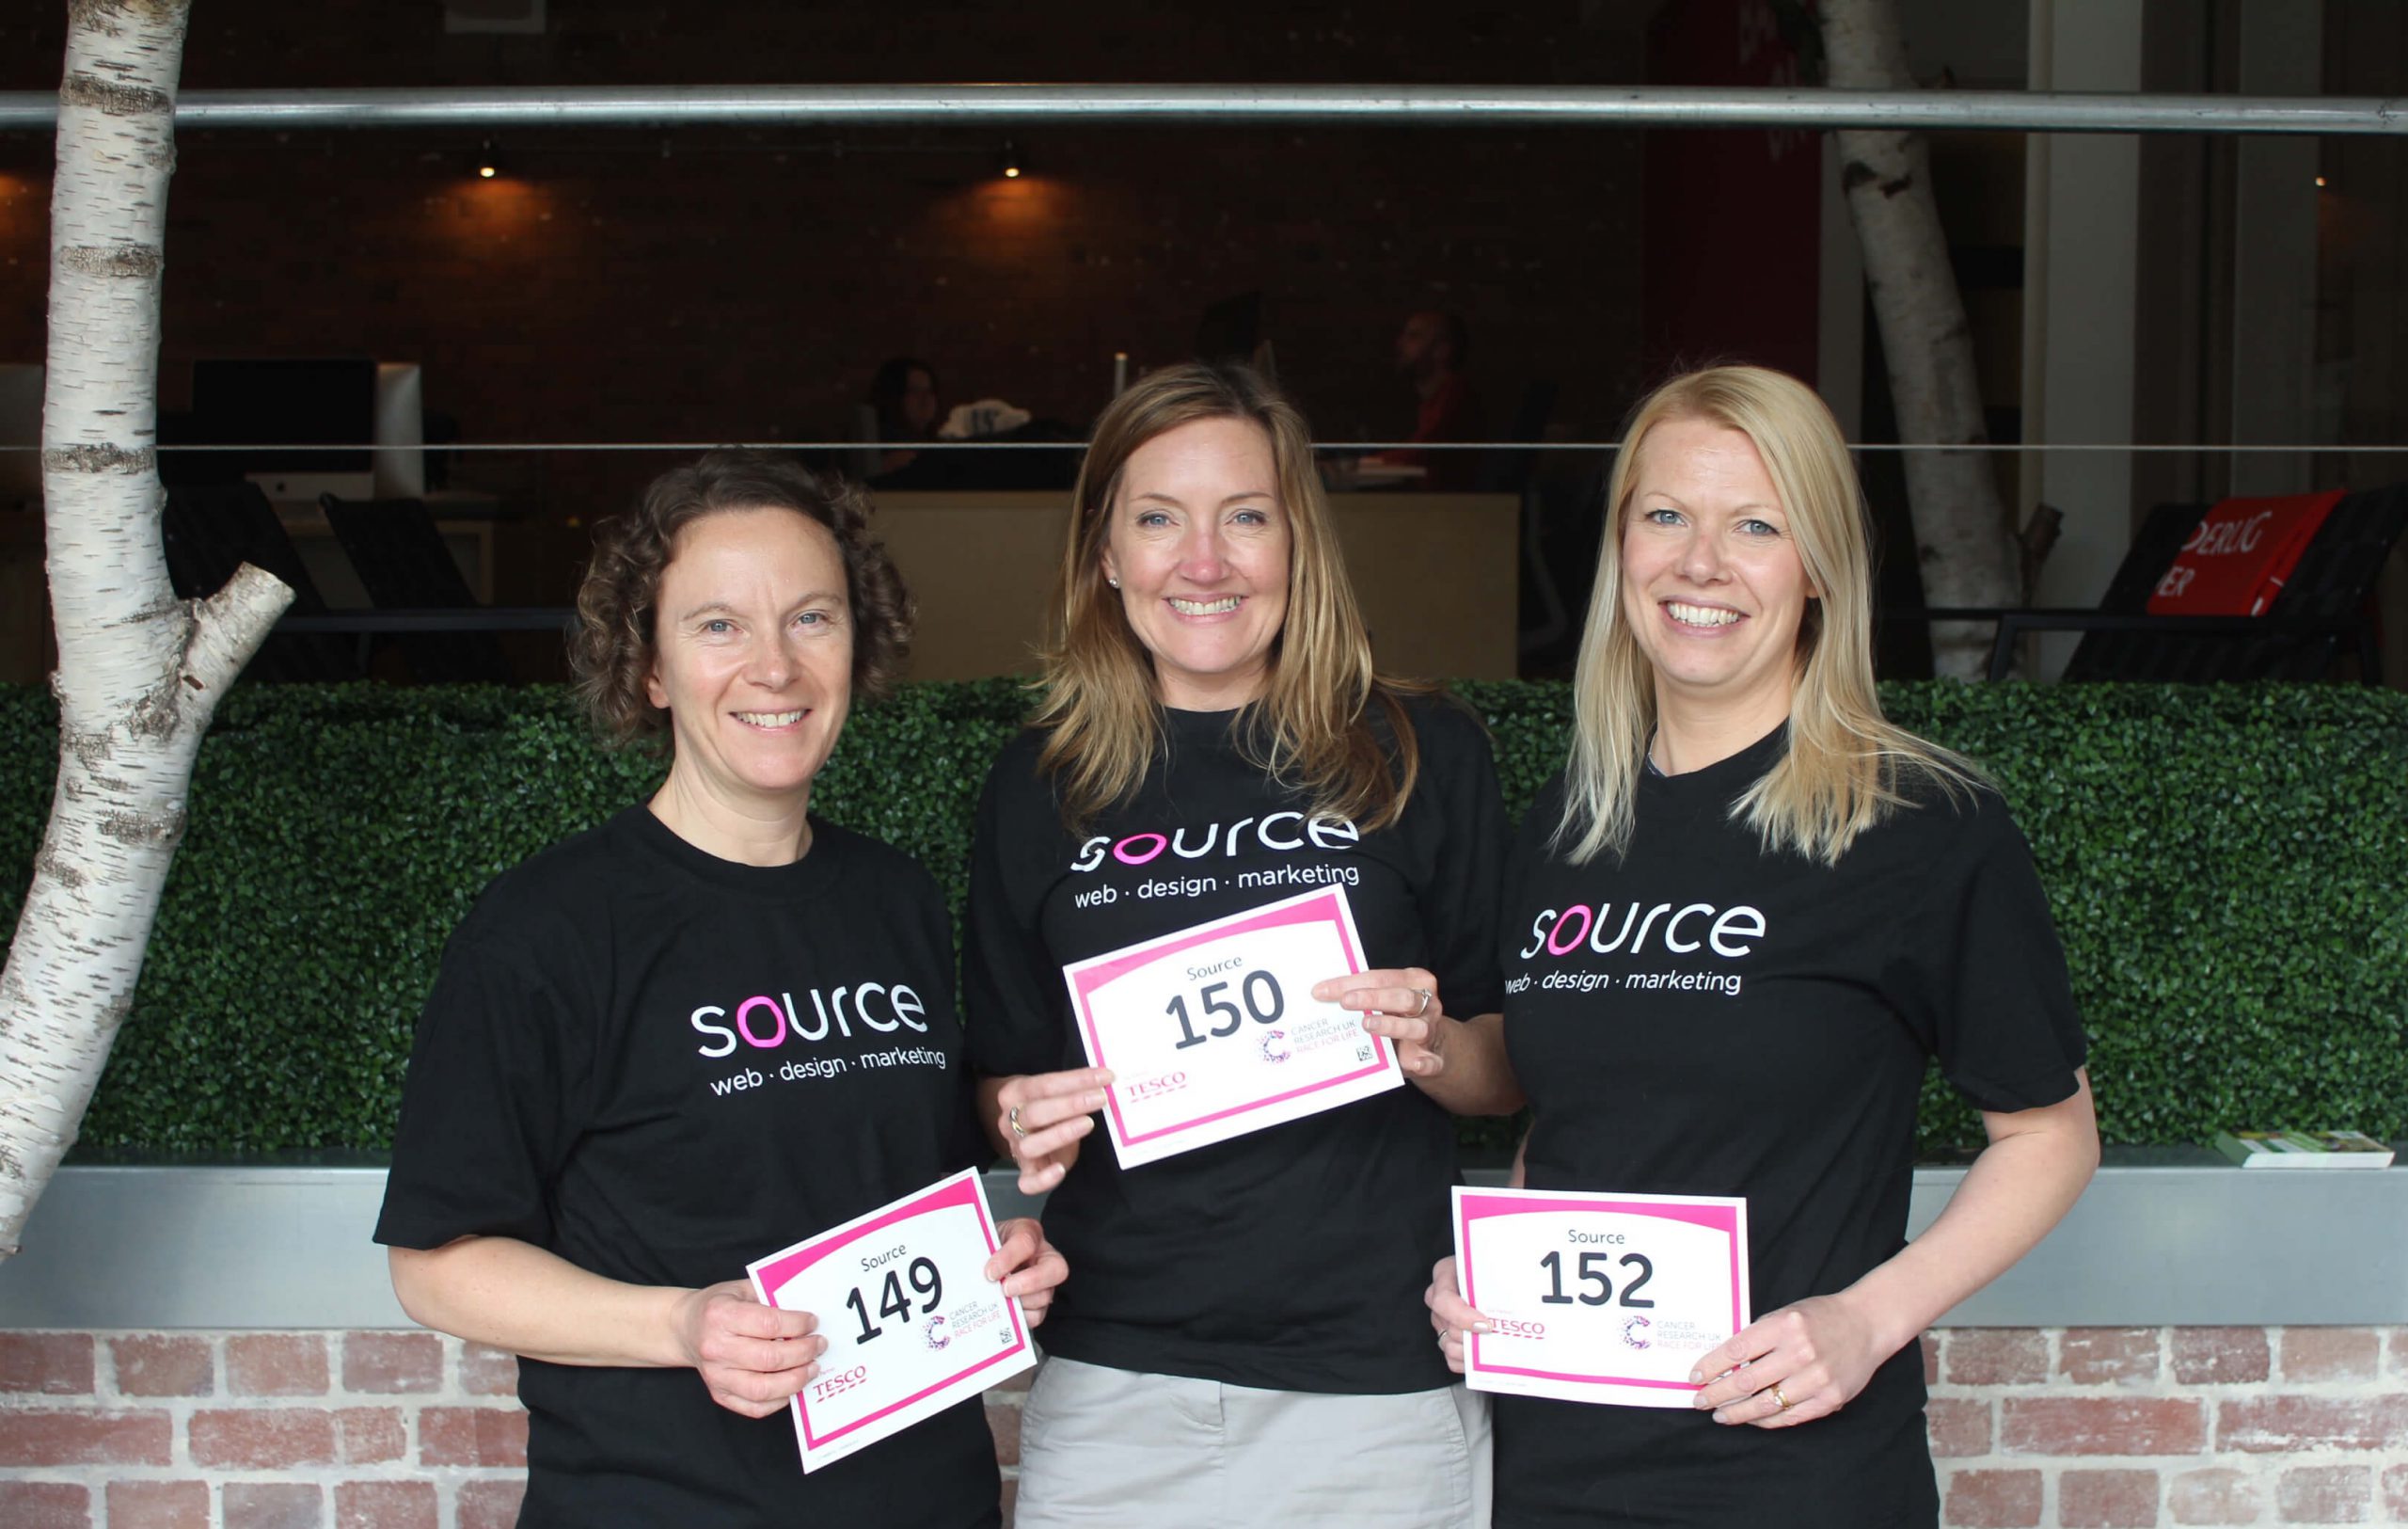 Source Raising Money For Cancer Research UK In Race For Life